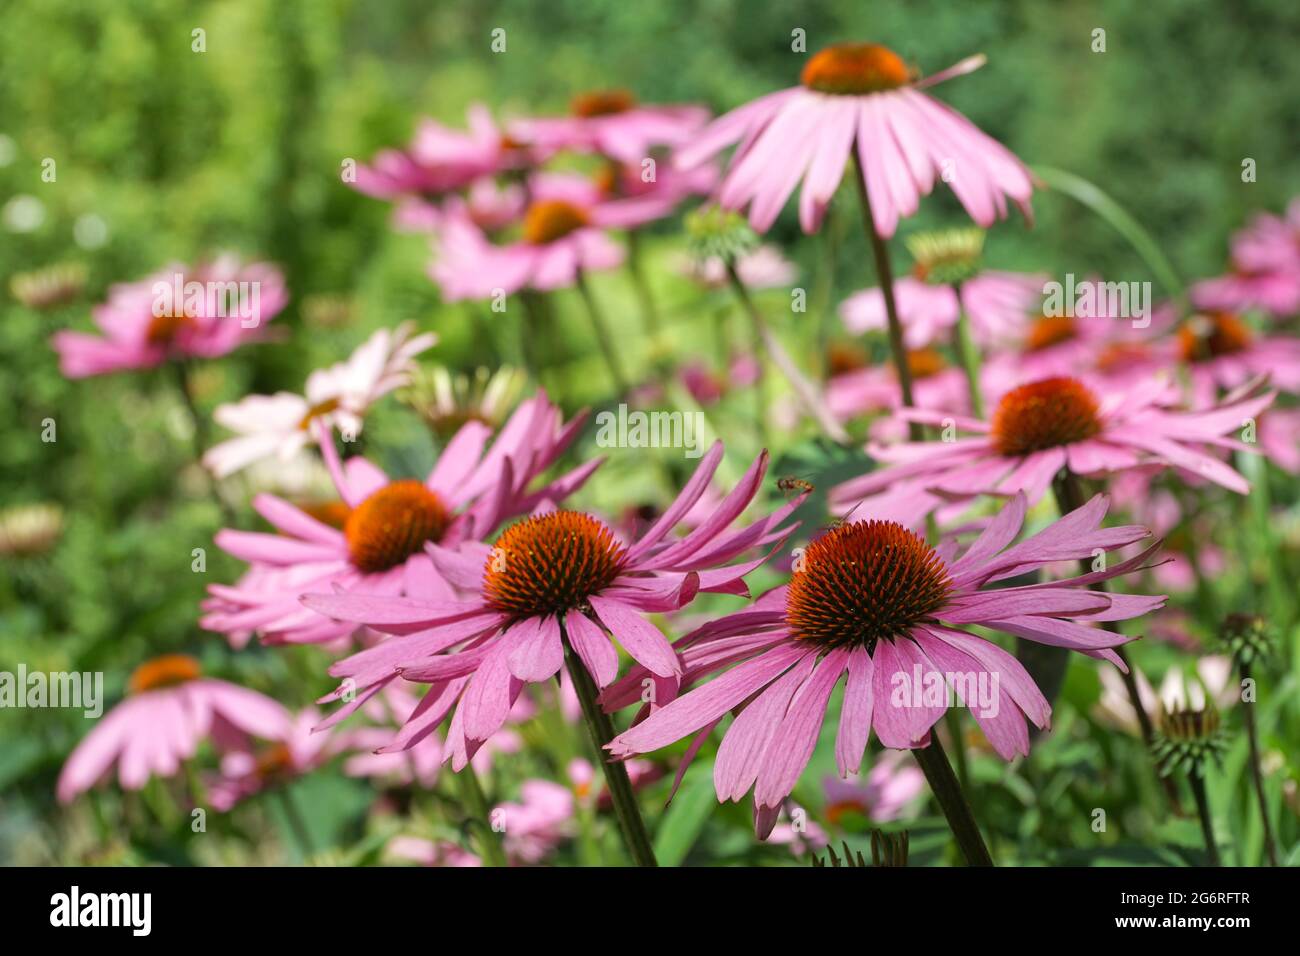 Group of echinacea flowers. Echinacea purpurea. Blurred background. Big purple and orange blossoms of coneflower. Flying wasps. Selective focus. Stock Photo